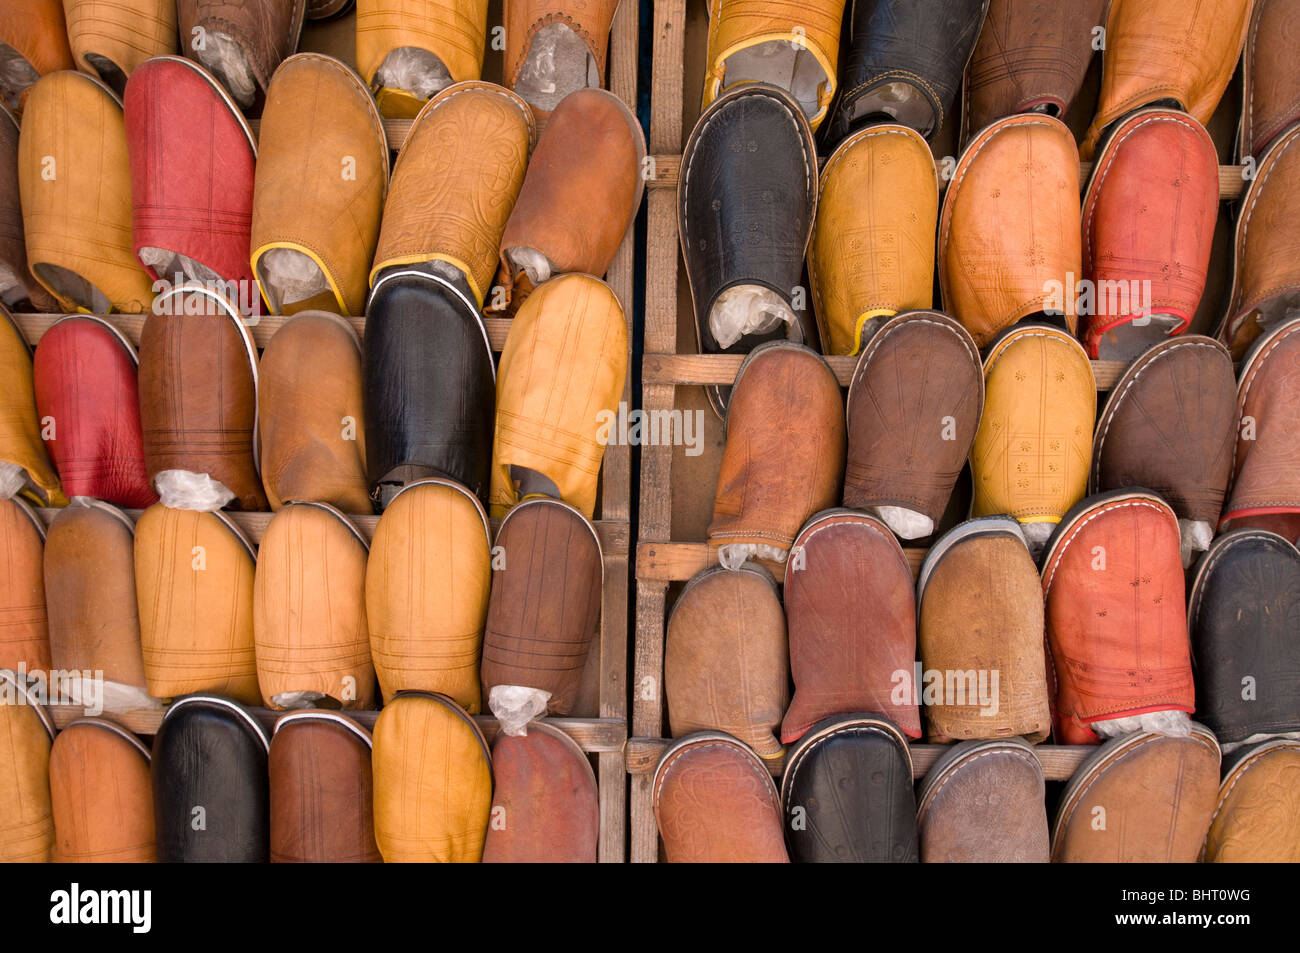 Babouche shoes on a rack Stock Photo